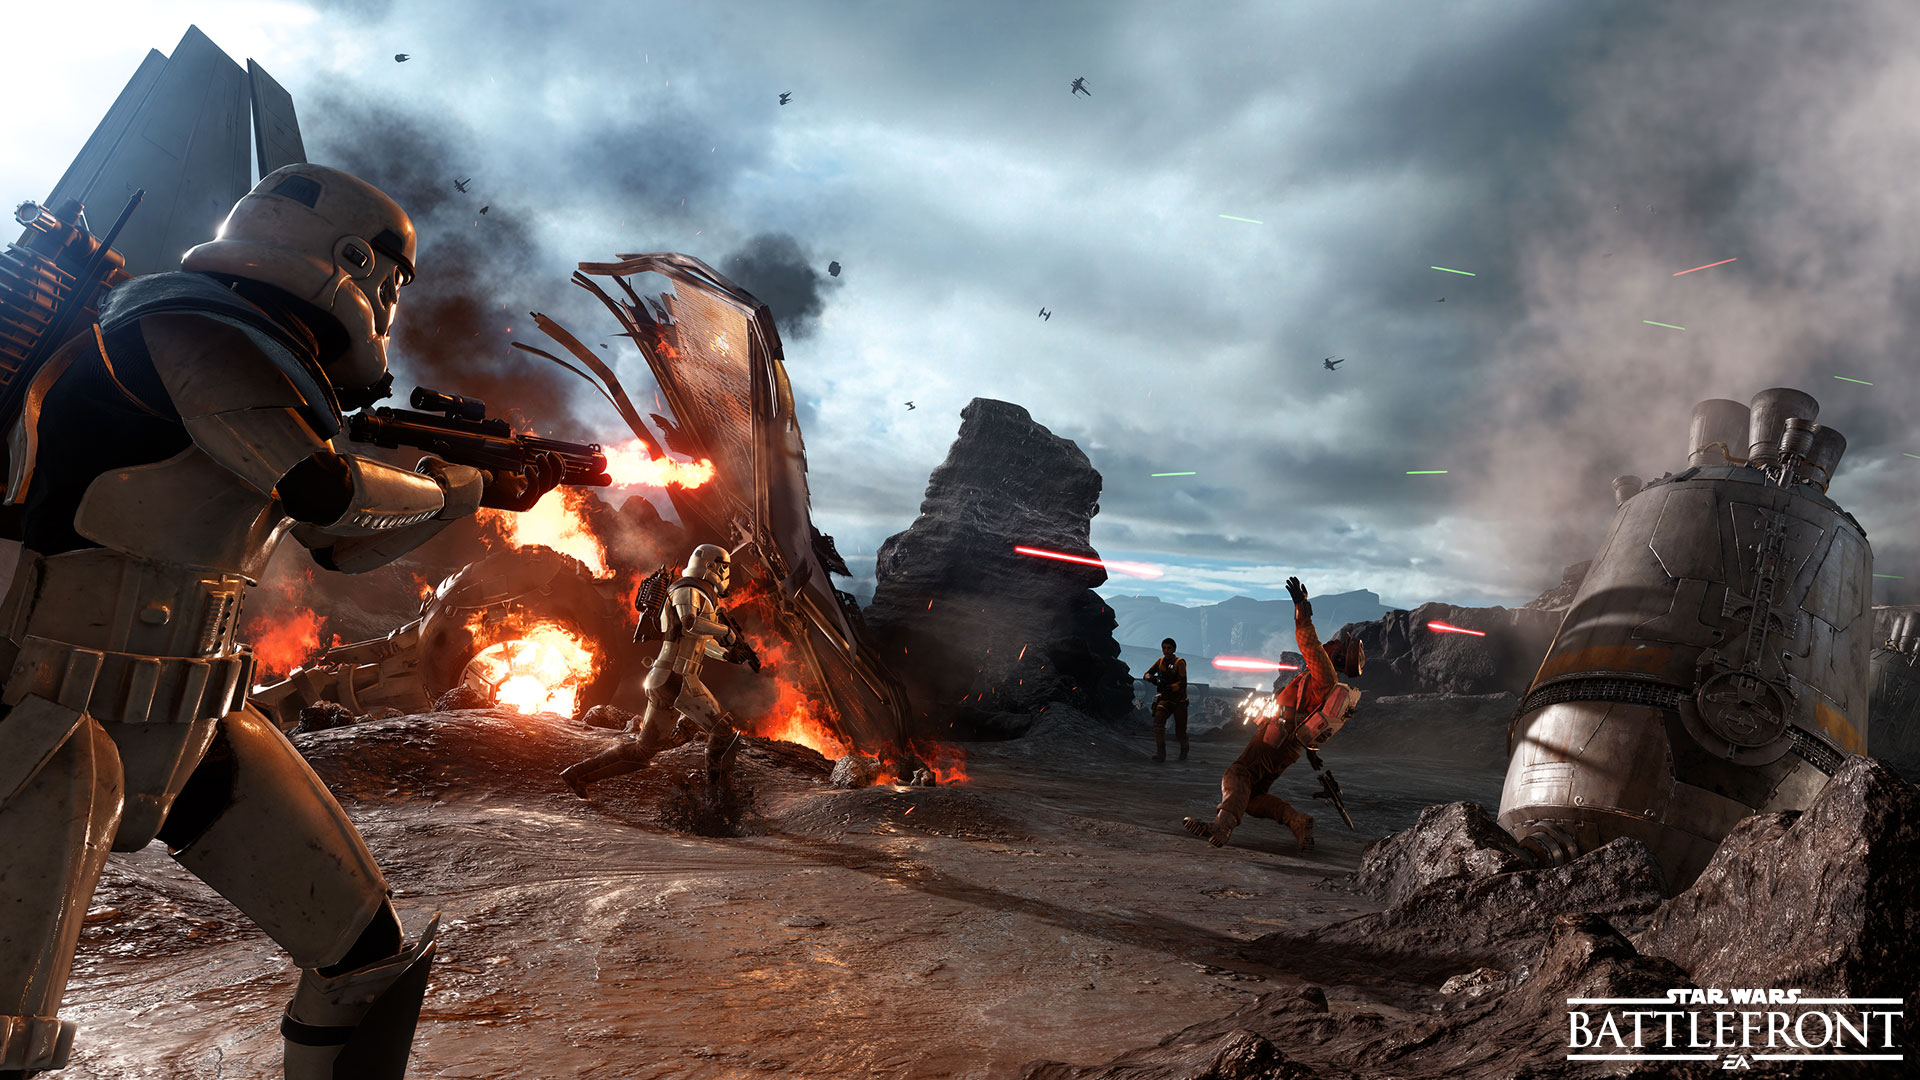 - Review - Wars Battlefront Co-Op Review